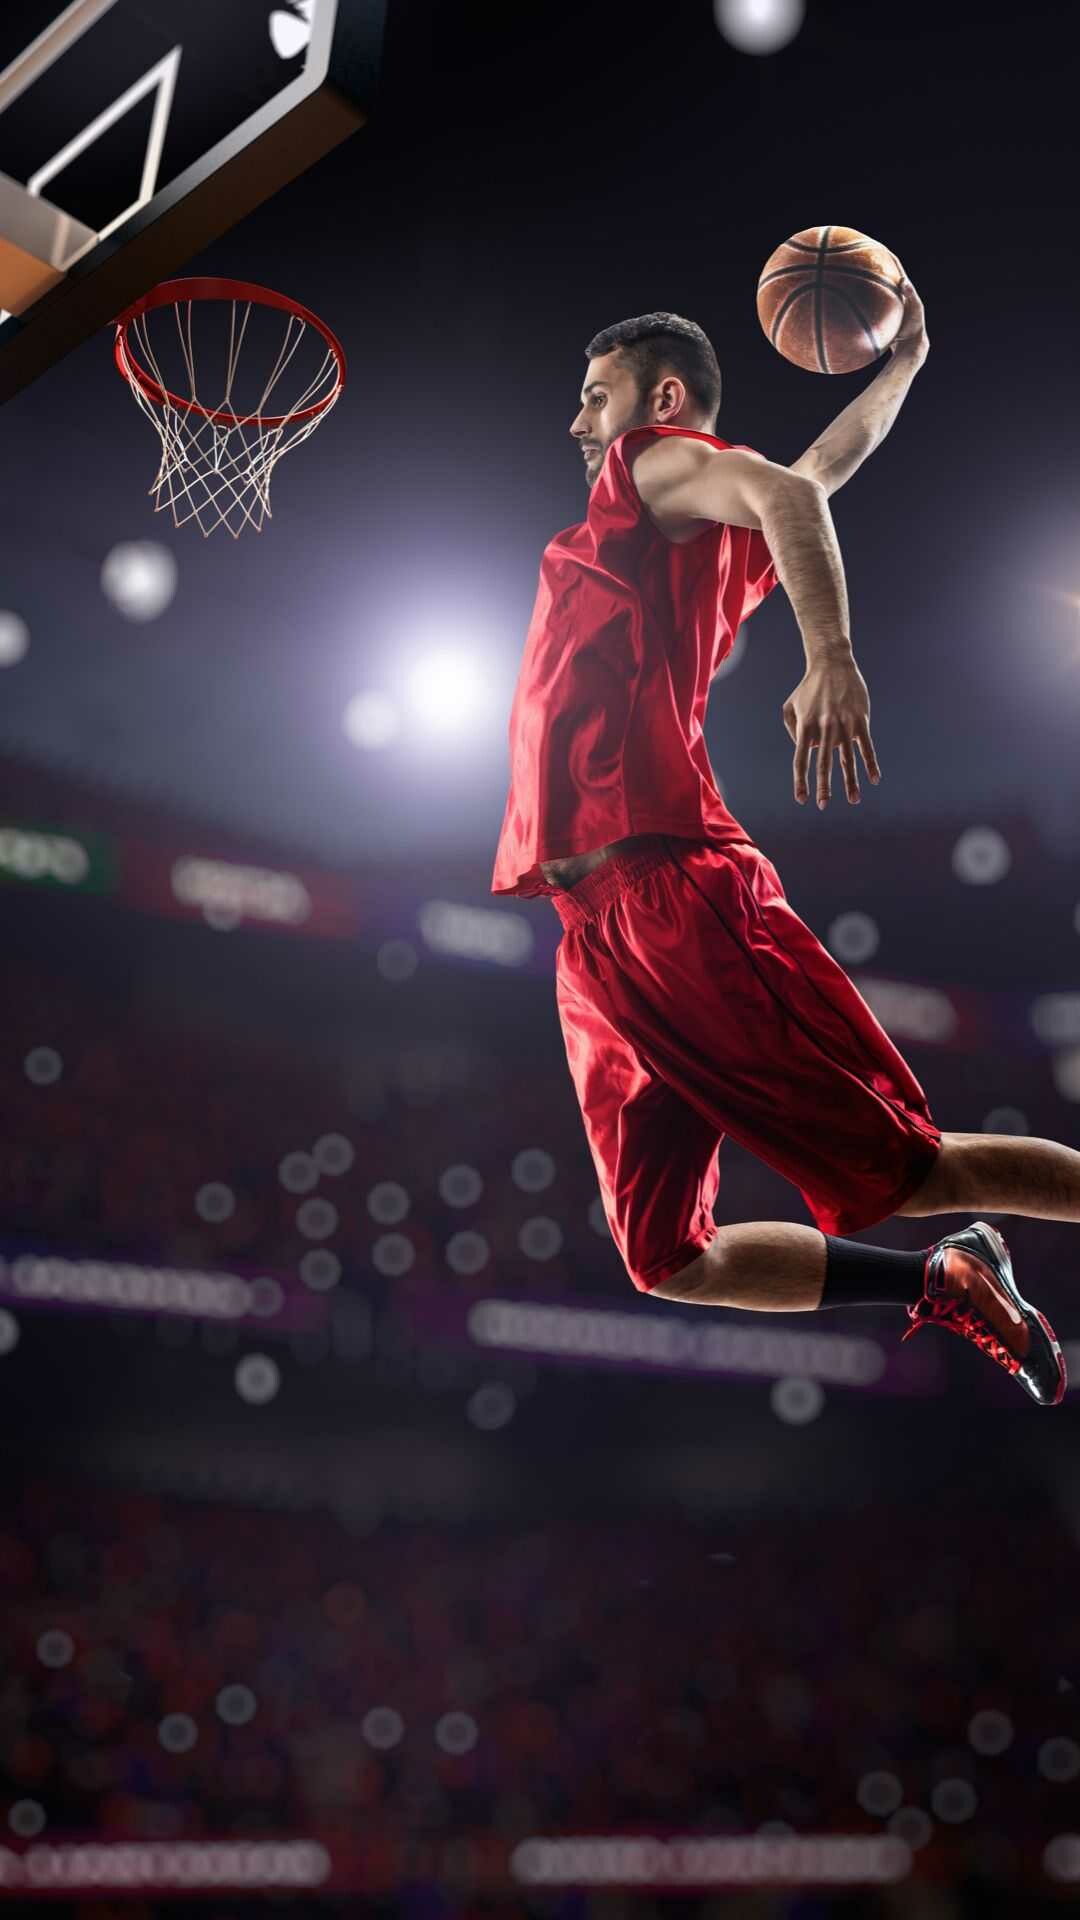 Basketball wallpapers, Sports backgrounds, Hoop dreams, Ball is life, 1080x1920 Full HD Phone